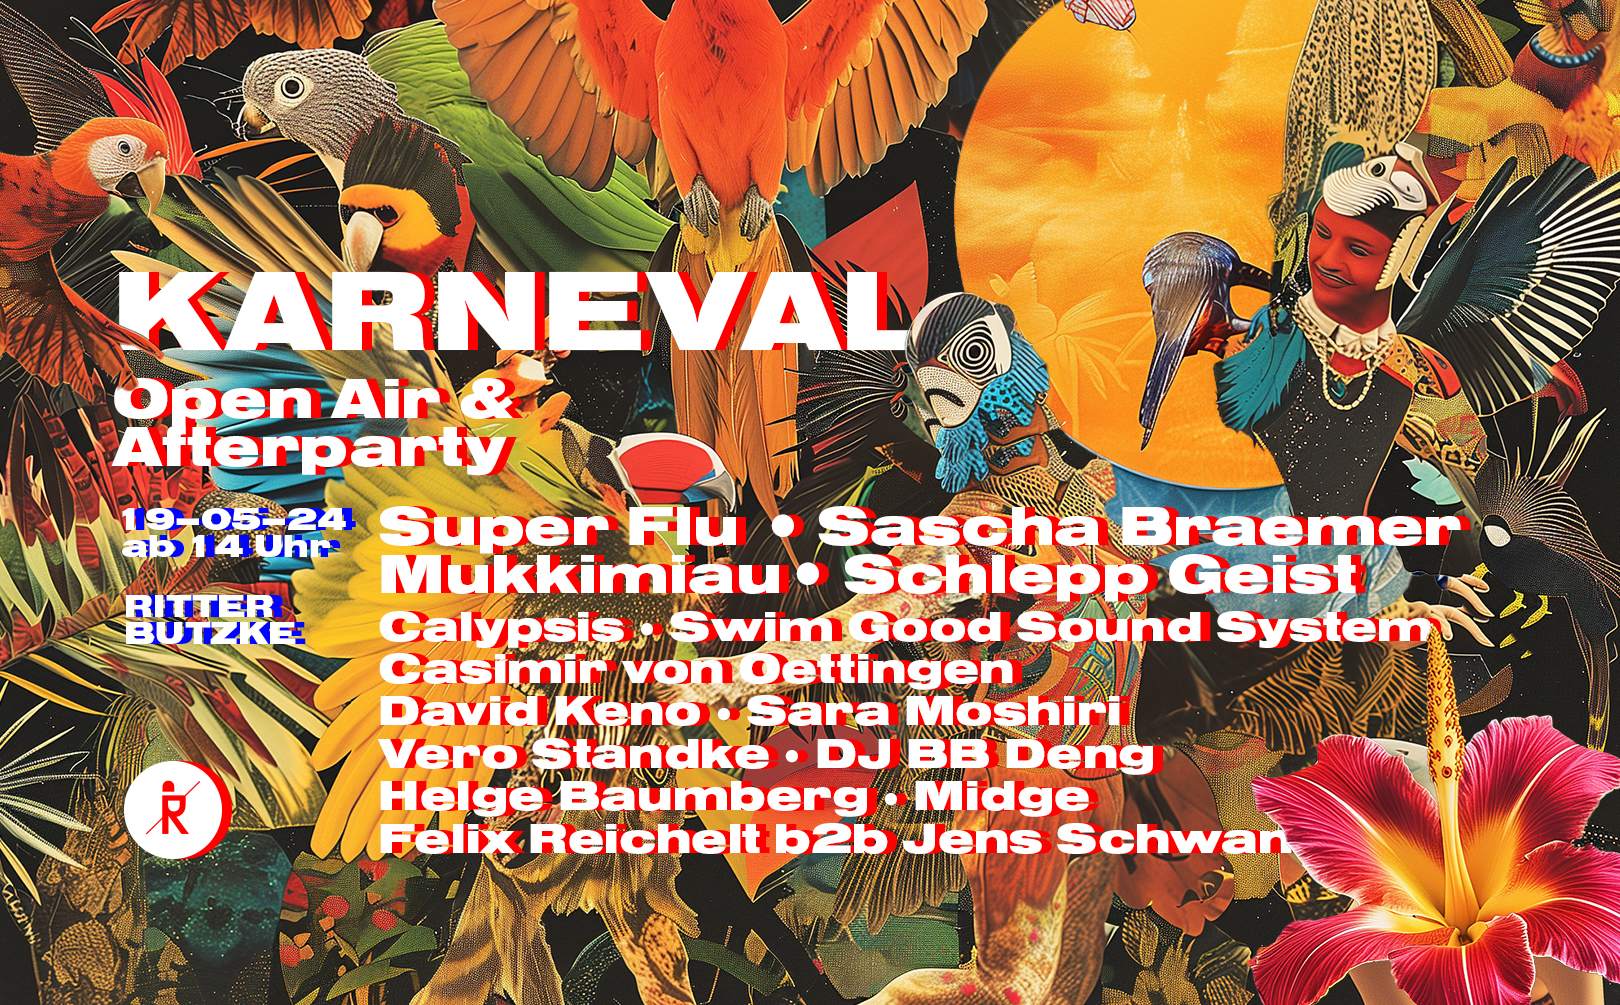 Karneval Open Air & Afterparty w/ Super Flu // free entry all night long - Página frontal